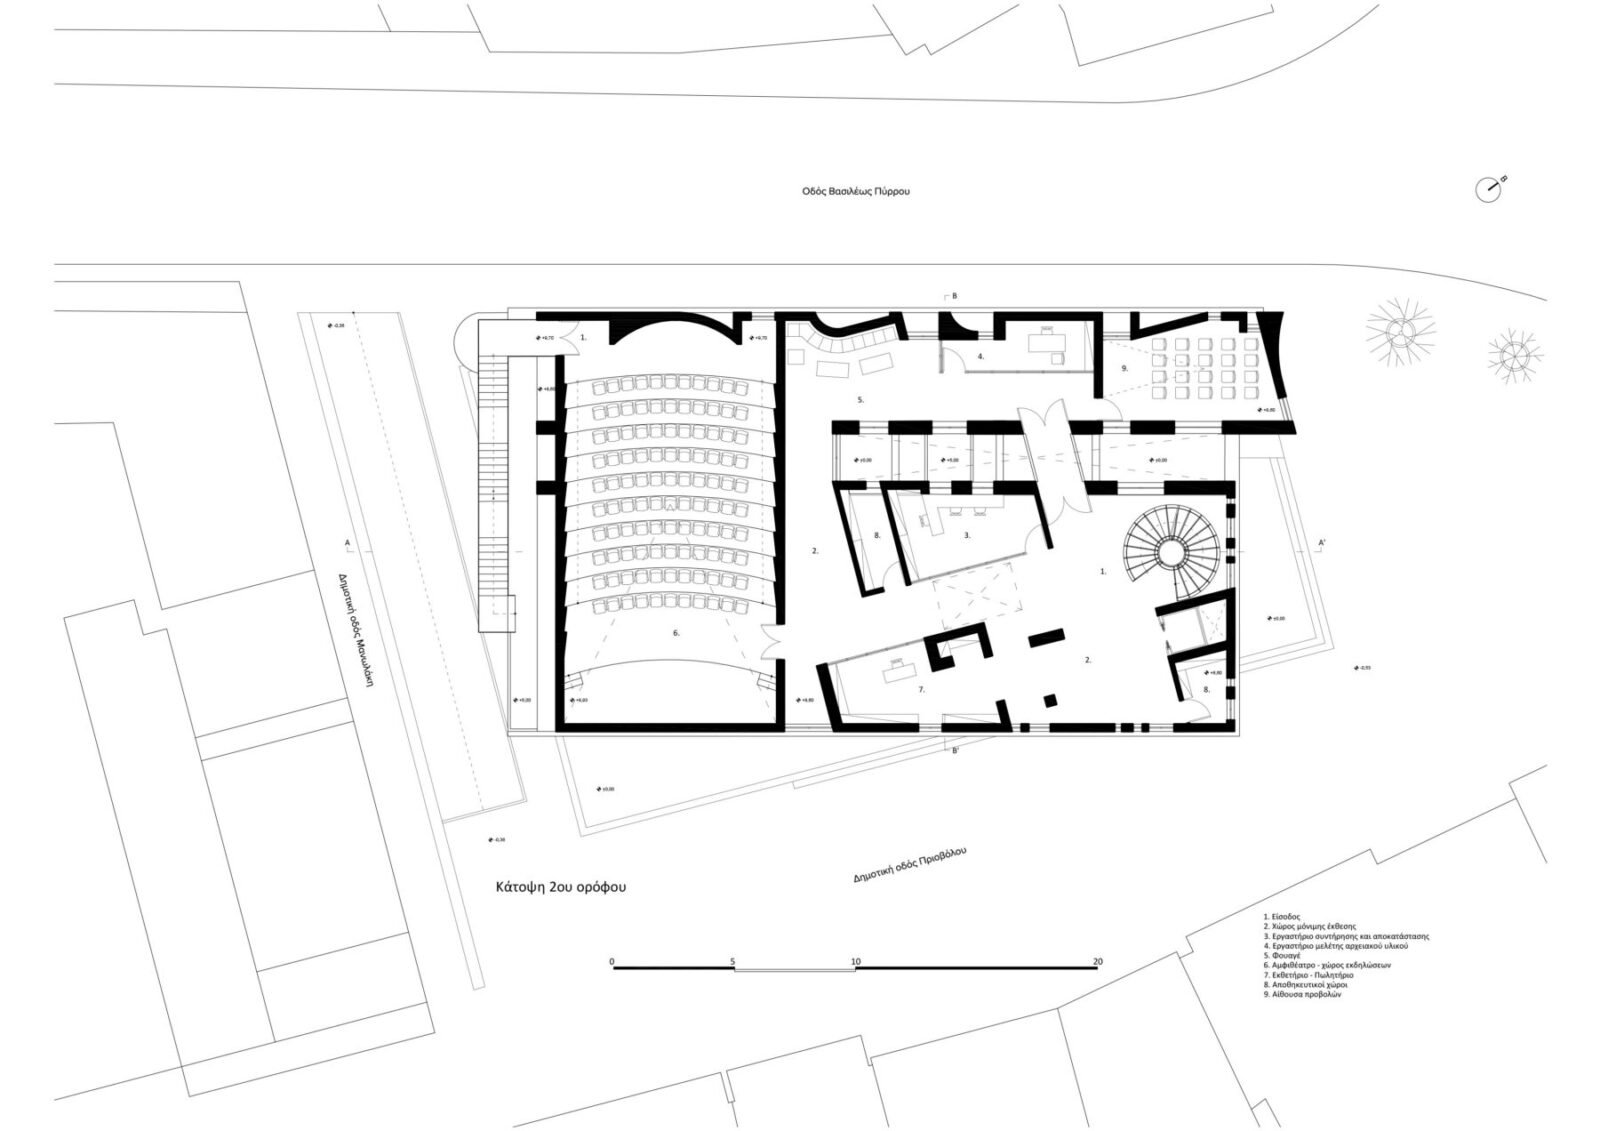 Archisearch Sevdalinka: a center for traditional Balkan Music & Agora | Diploma thesis by Dimitris Molonis